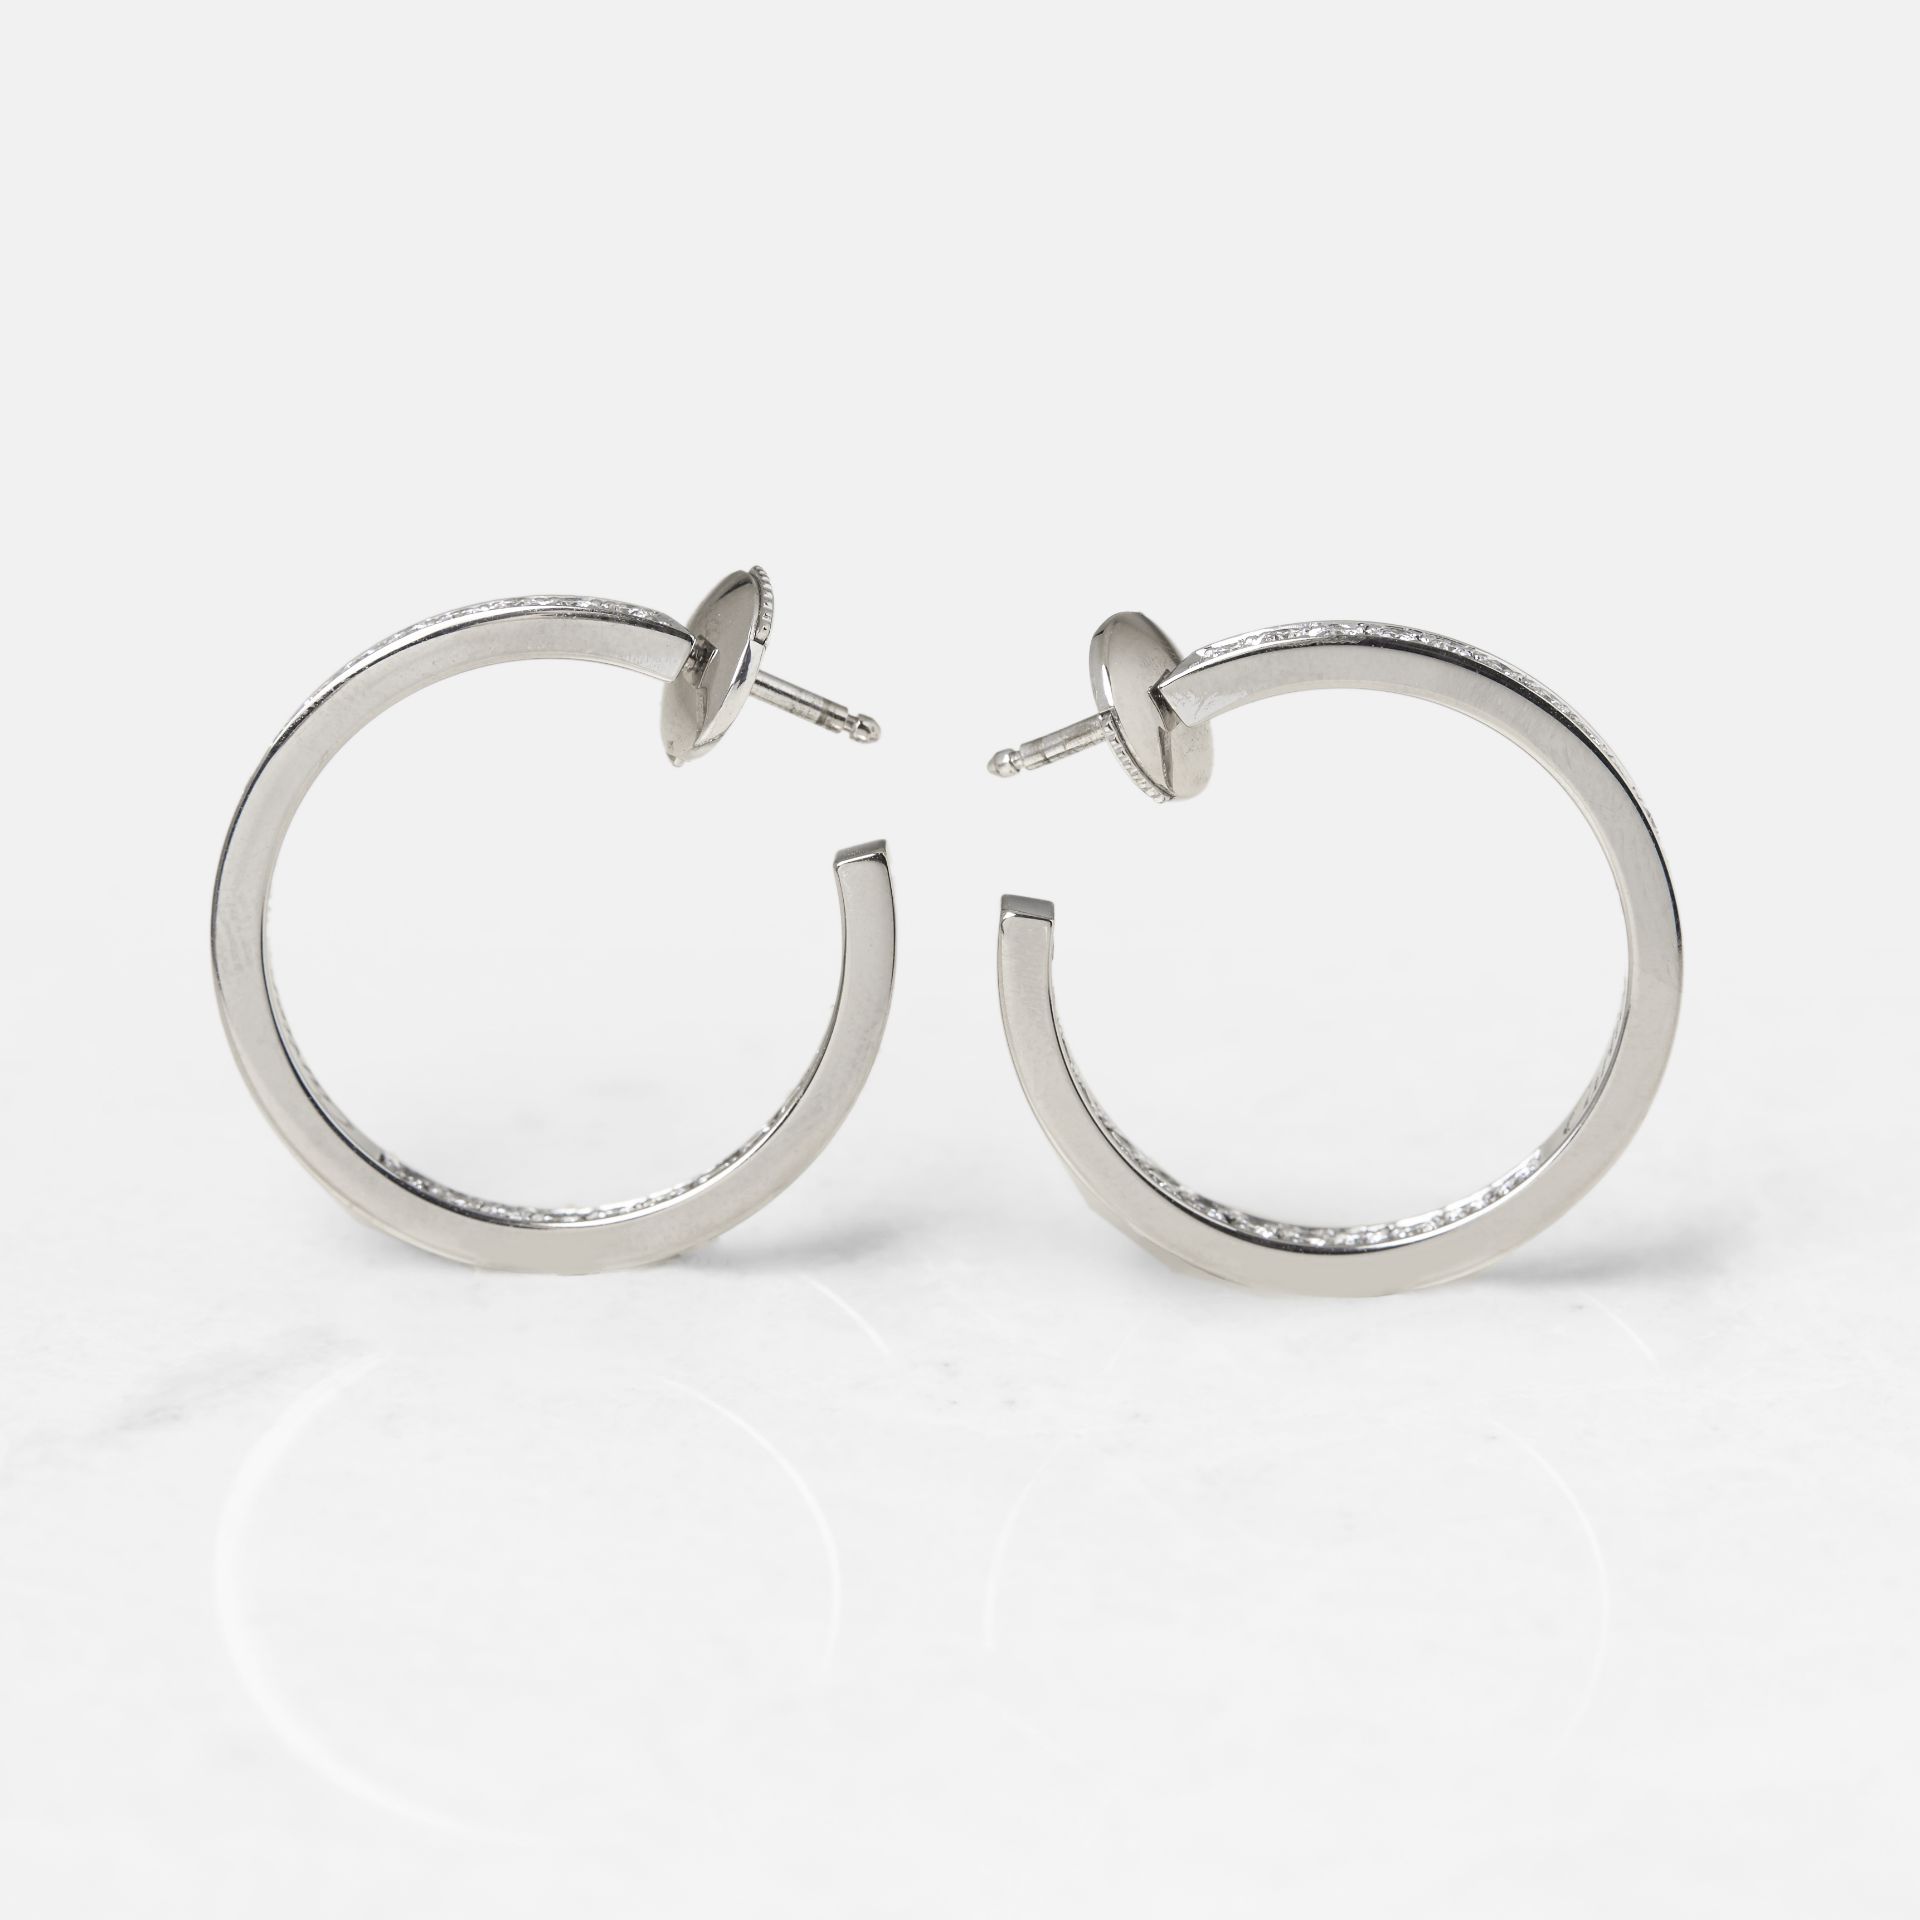 Cartier 18k White Gold 1.20ct Diamond Inside Out Hoop Earrings - Image 10 of 12